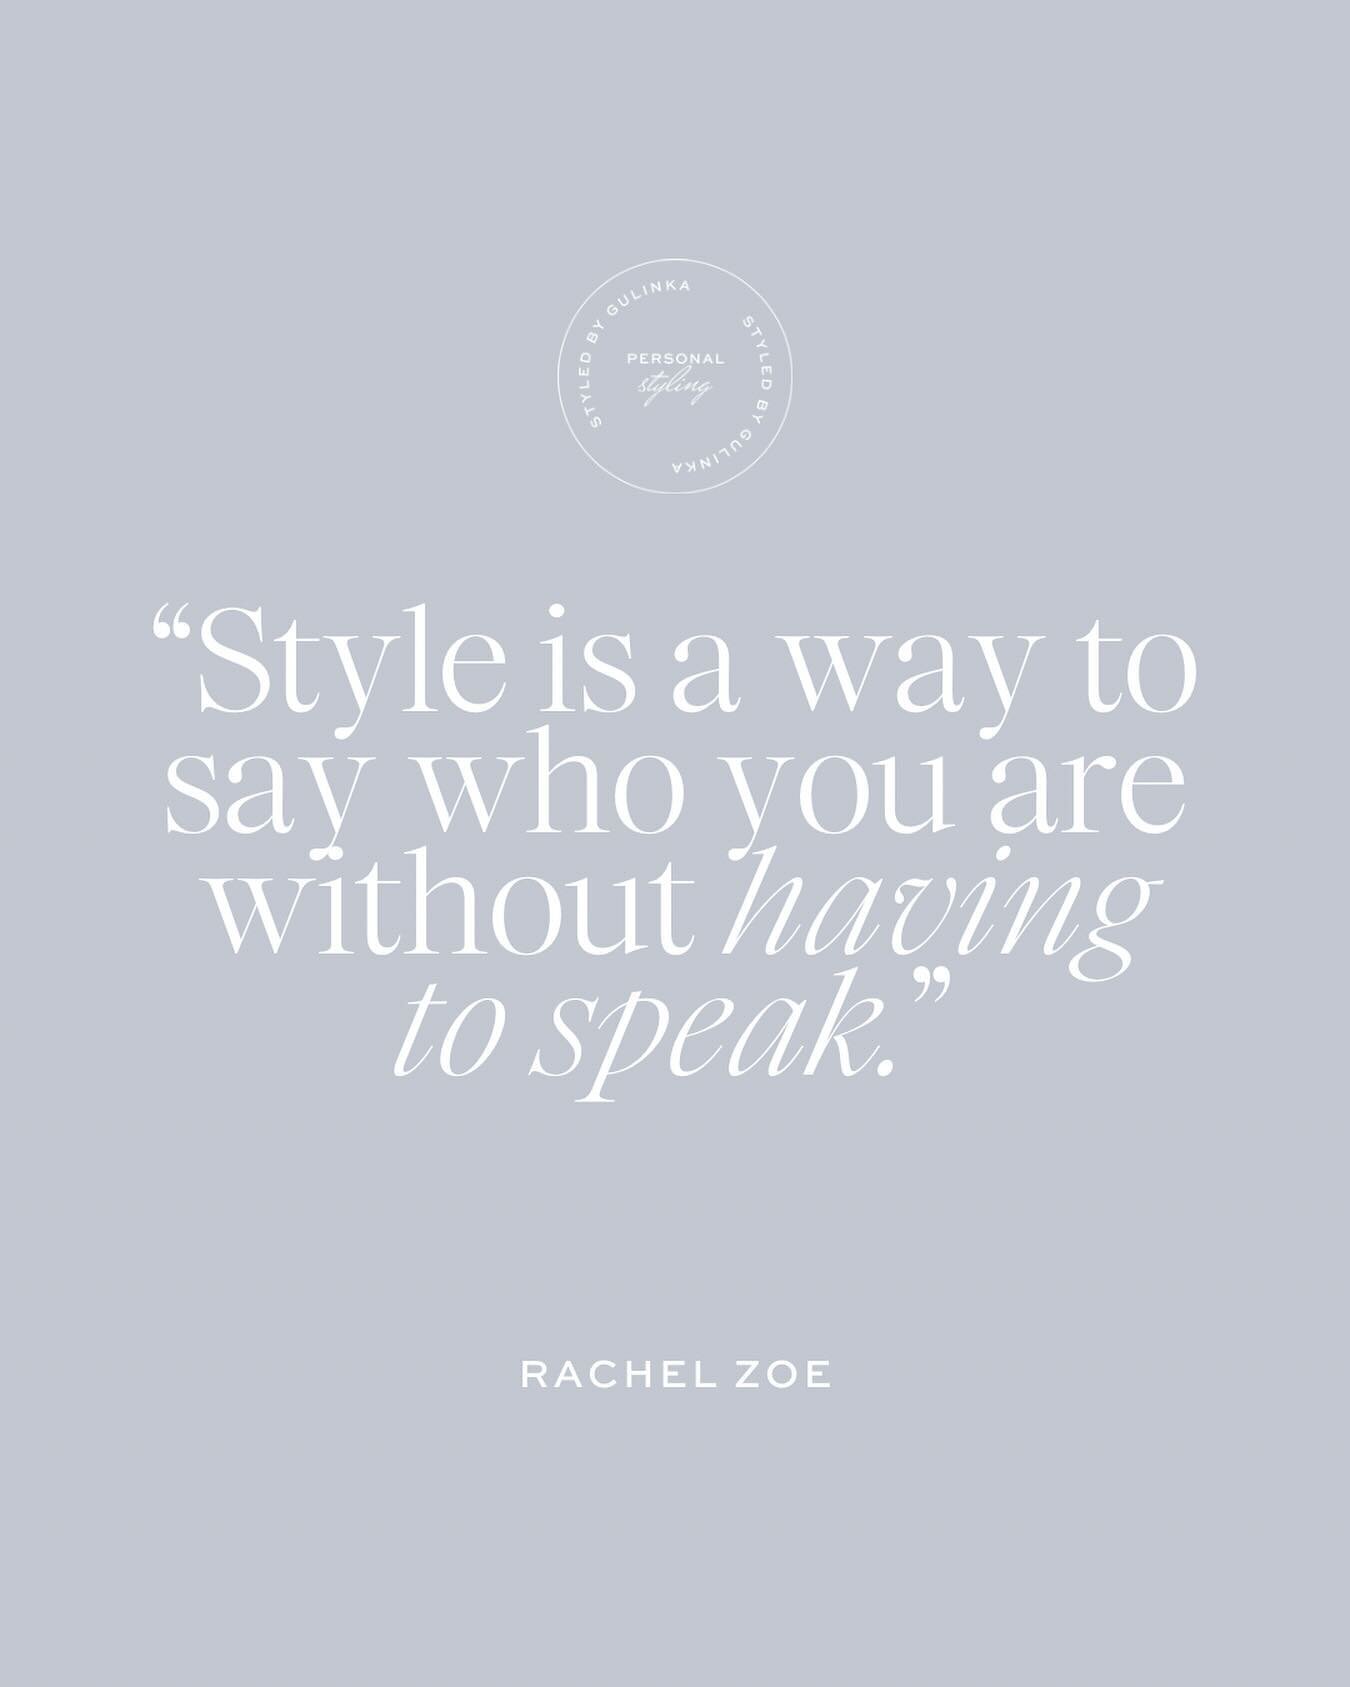 Style is one of the ultimate forms of self expression 😊

#stylequotes #styleinspiration #personalstyle #personalstylist